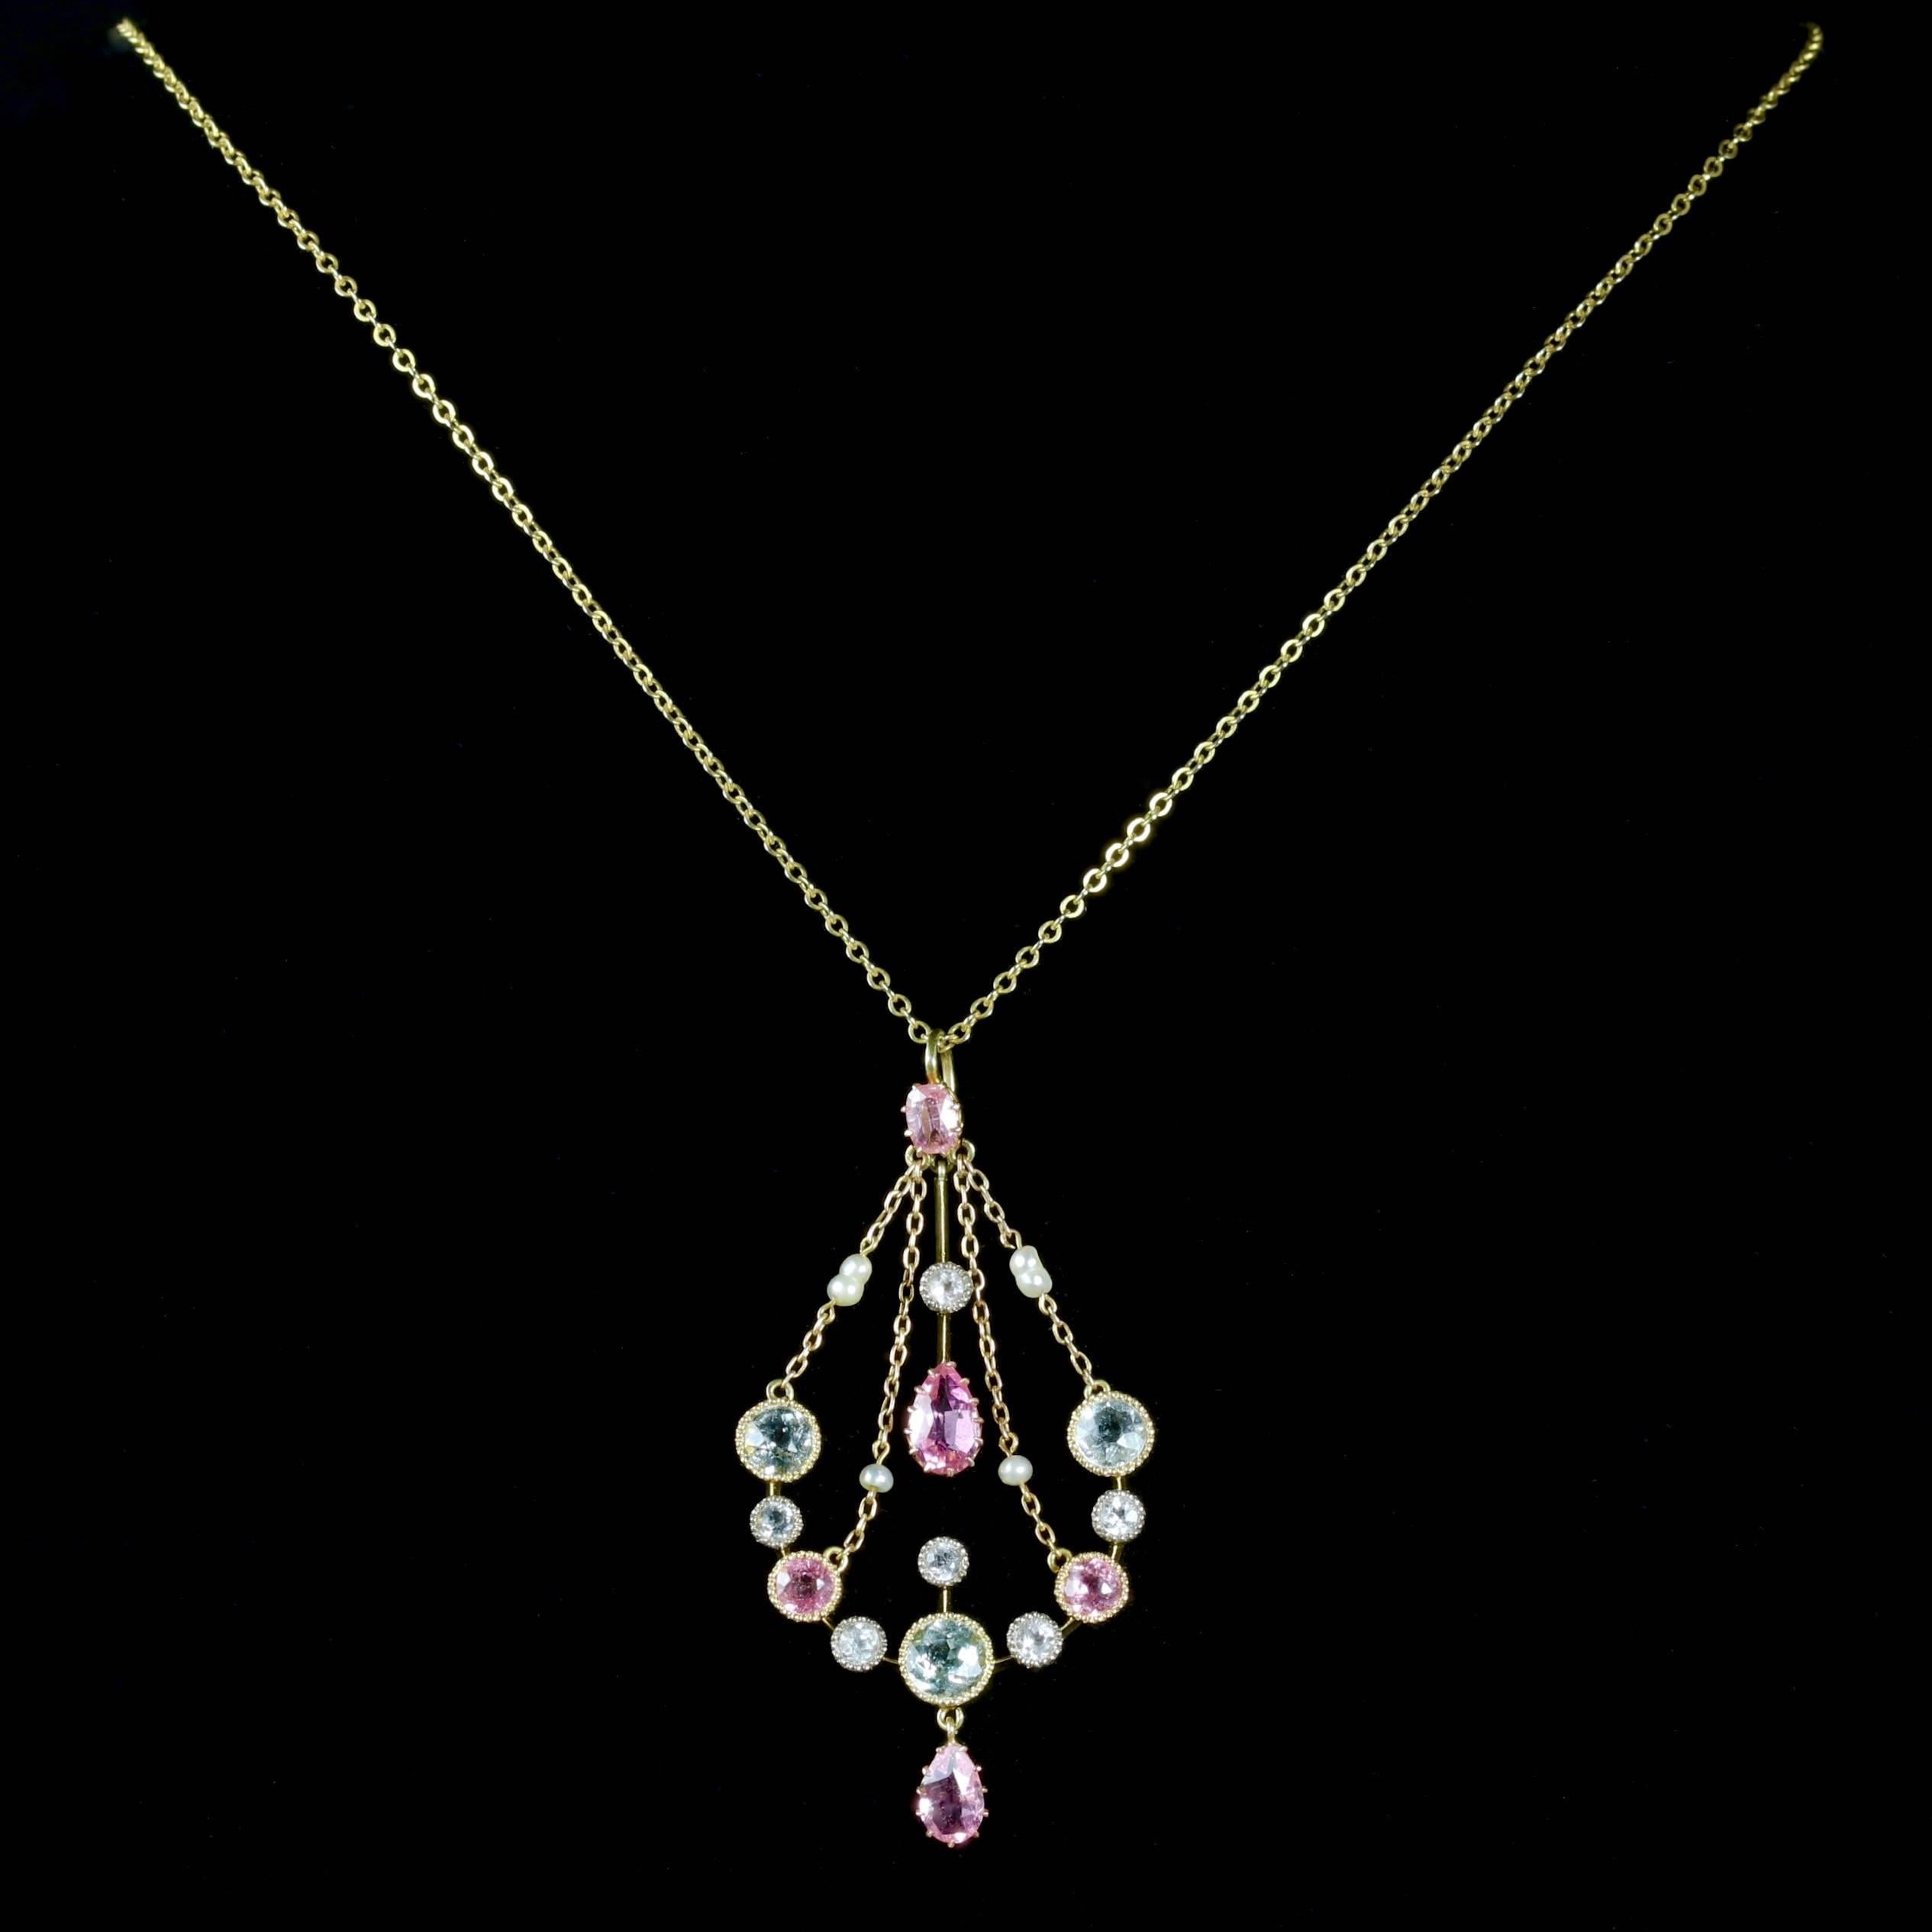 This fabulous Victorian 18ct Gold necklace and pendant is Circa 1900.

The wonderful pendant is decorated in beautiful blue Aquamarines, Pink Sapphires and lovely Baroque Pearls which compliment each other superbly on the pendulum style